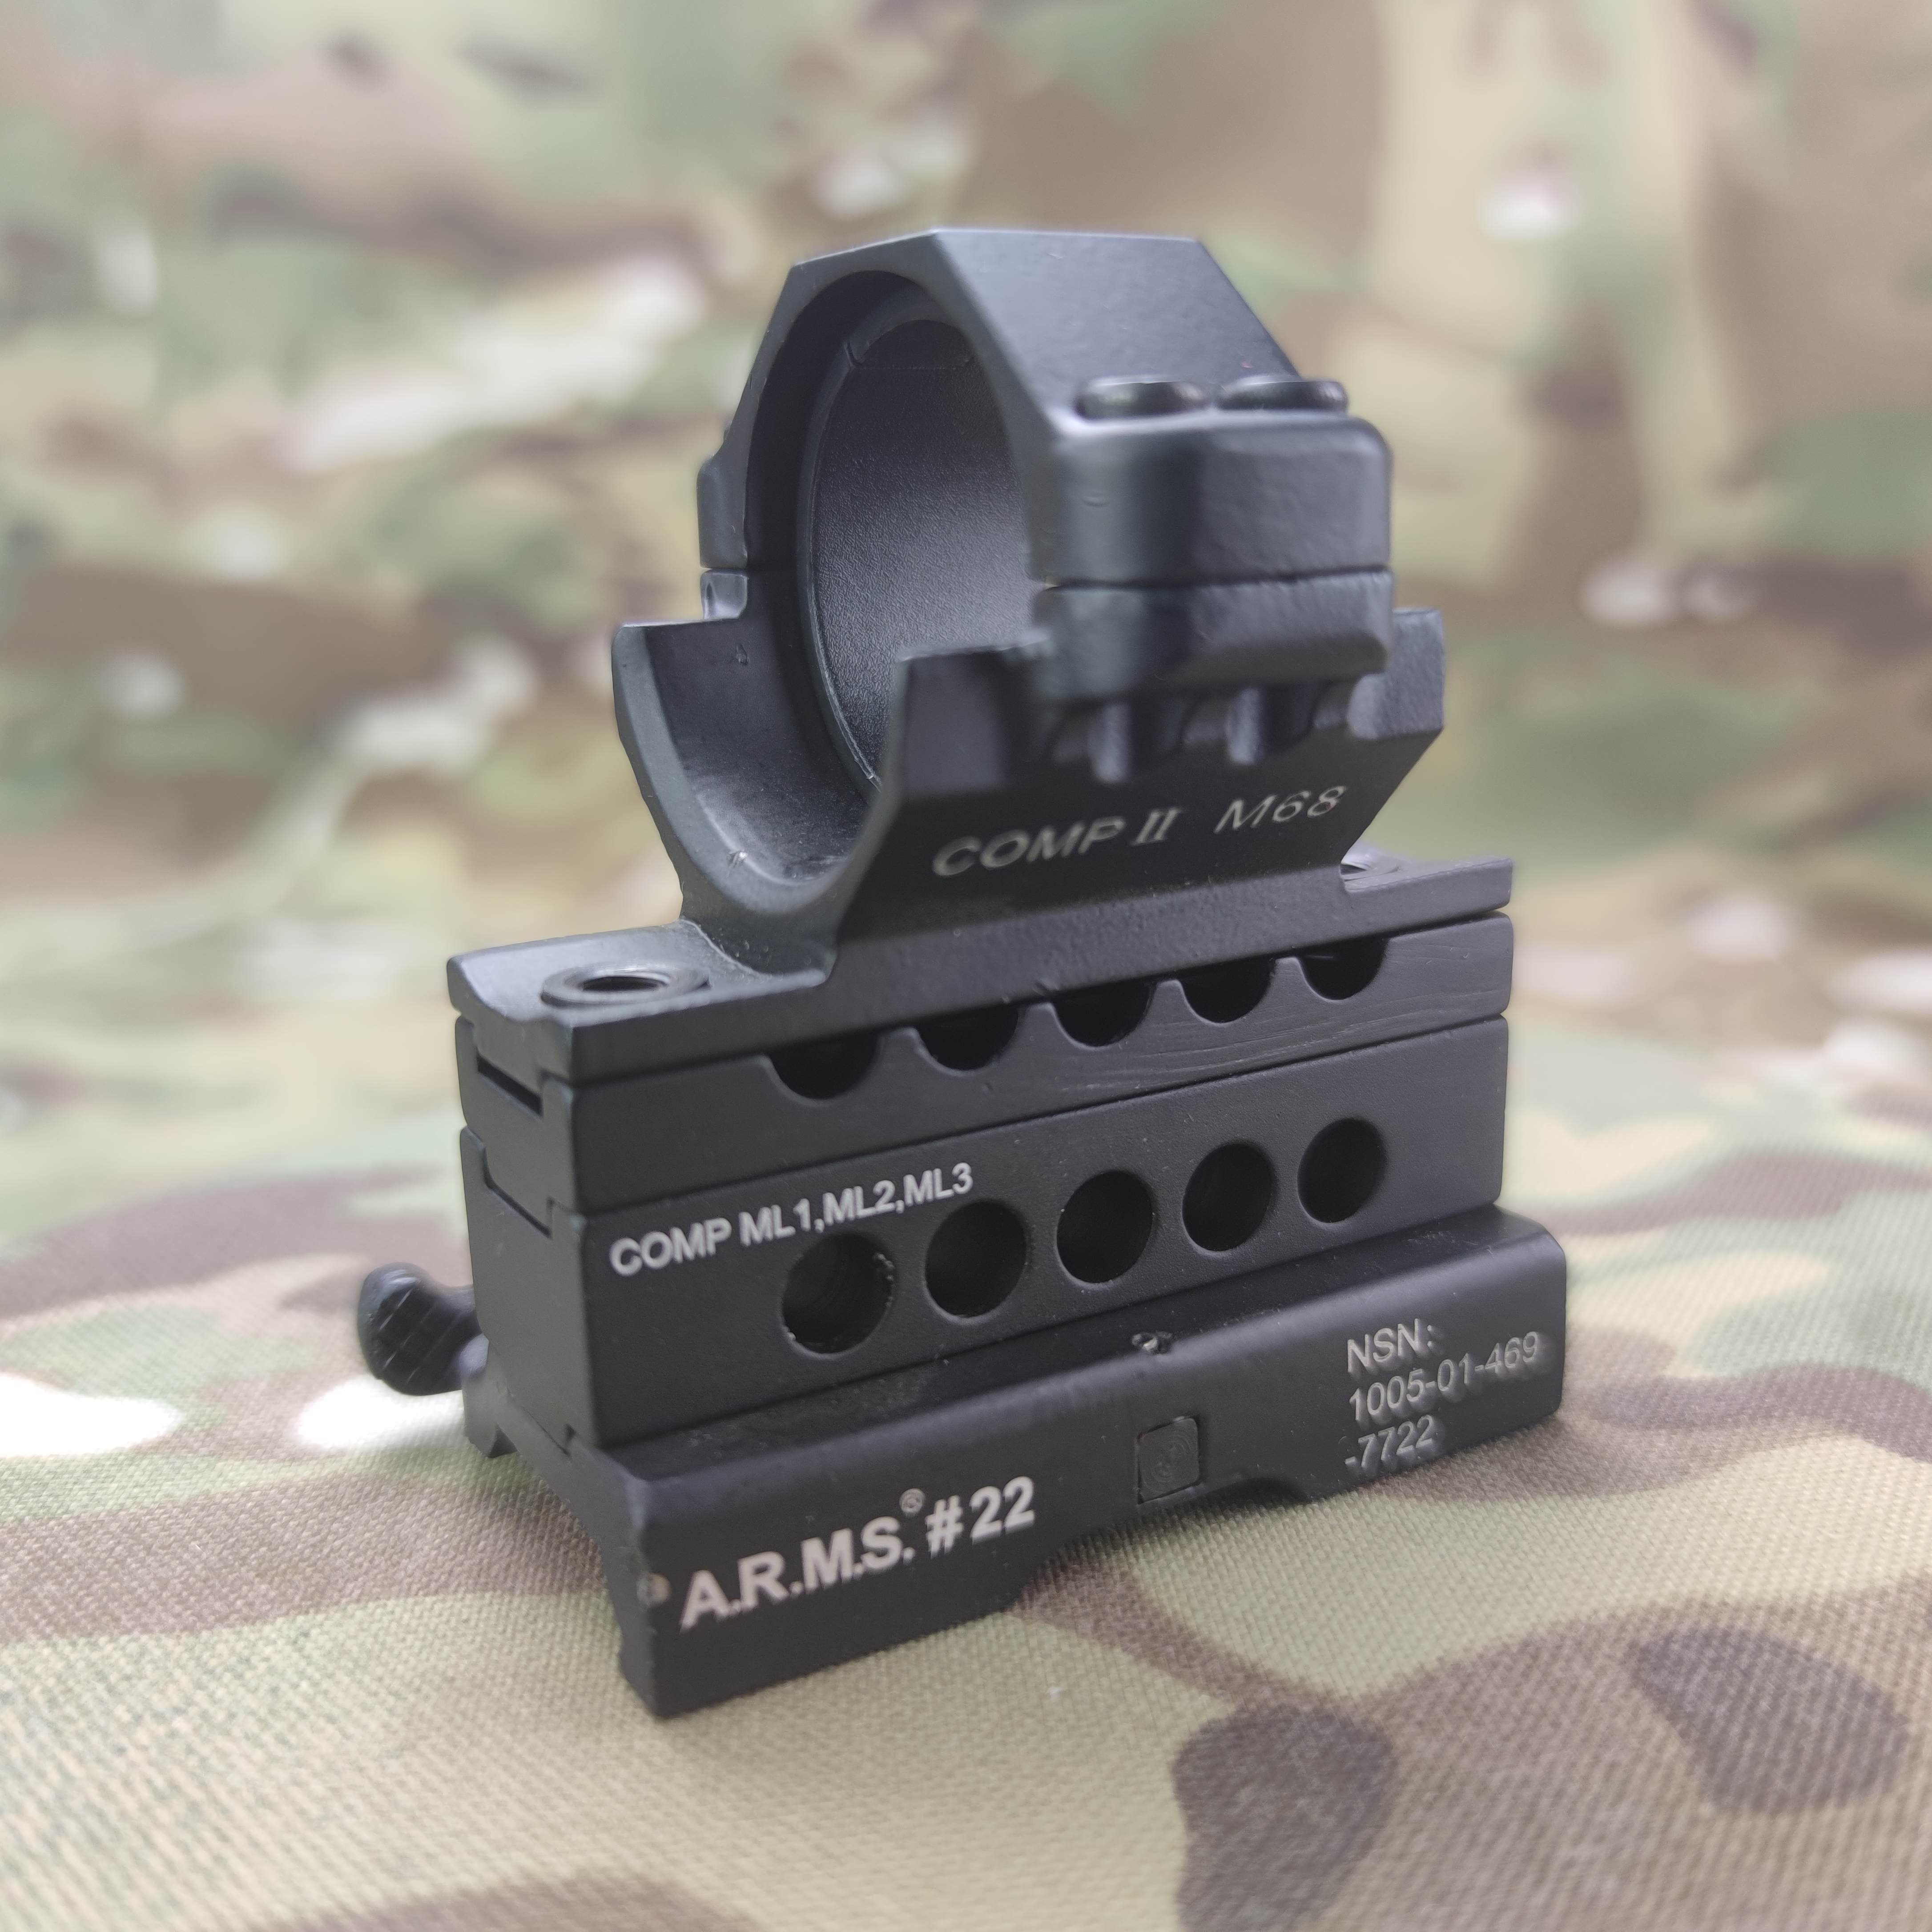 Airsoft M2 arms Mount MK18 Comp Mount For M2 M3 Type Tactical Sight Gun Weapon Light Torch Mount RIS 20mm Weaver Rail